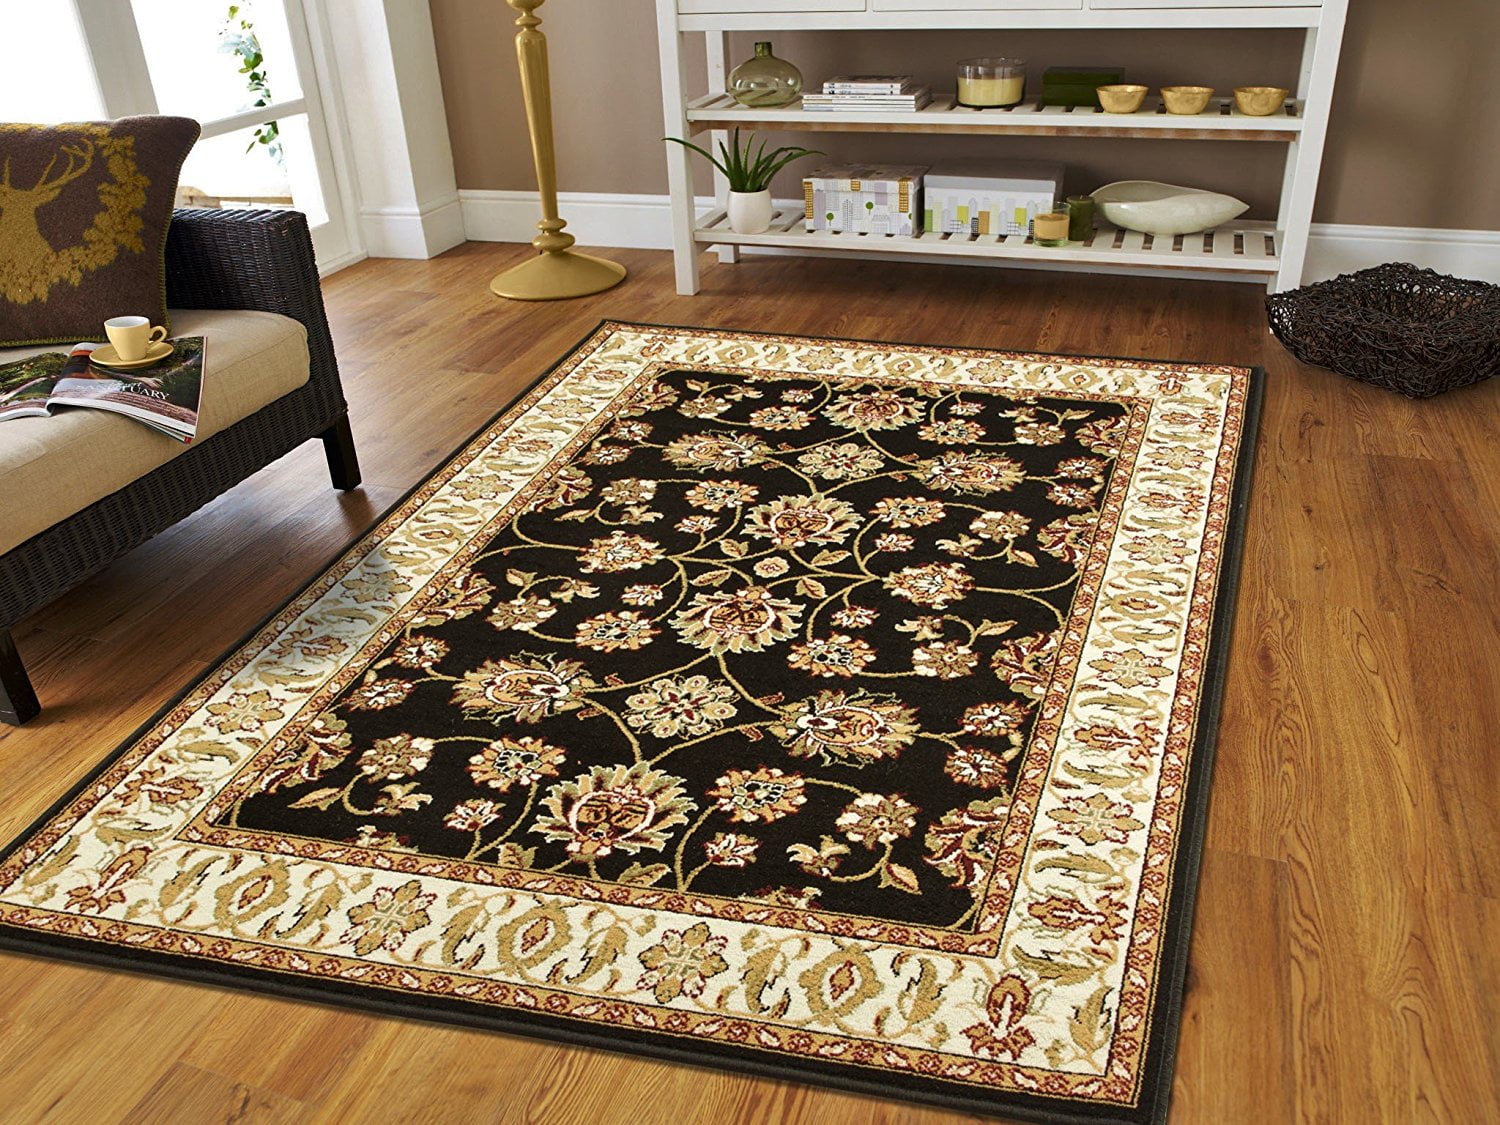 Black 2x3 Entrance Rug Washable 2x4, Small Area Rugs For Foyer